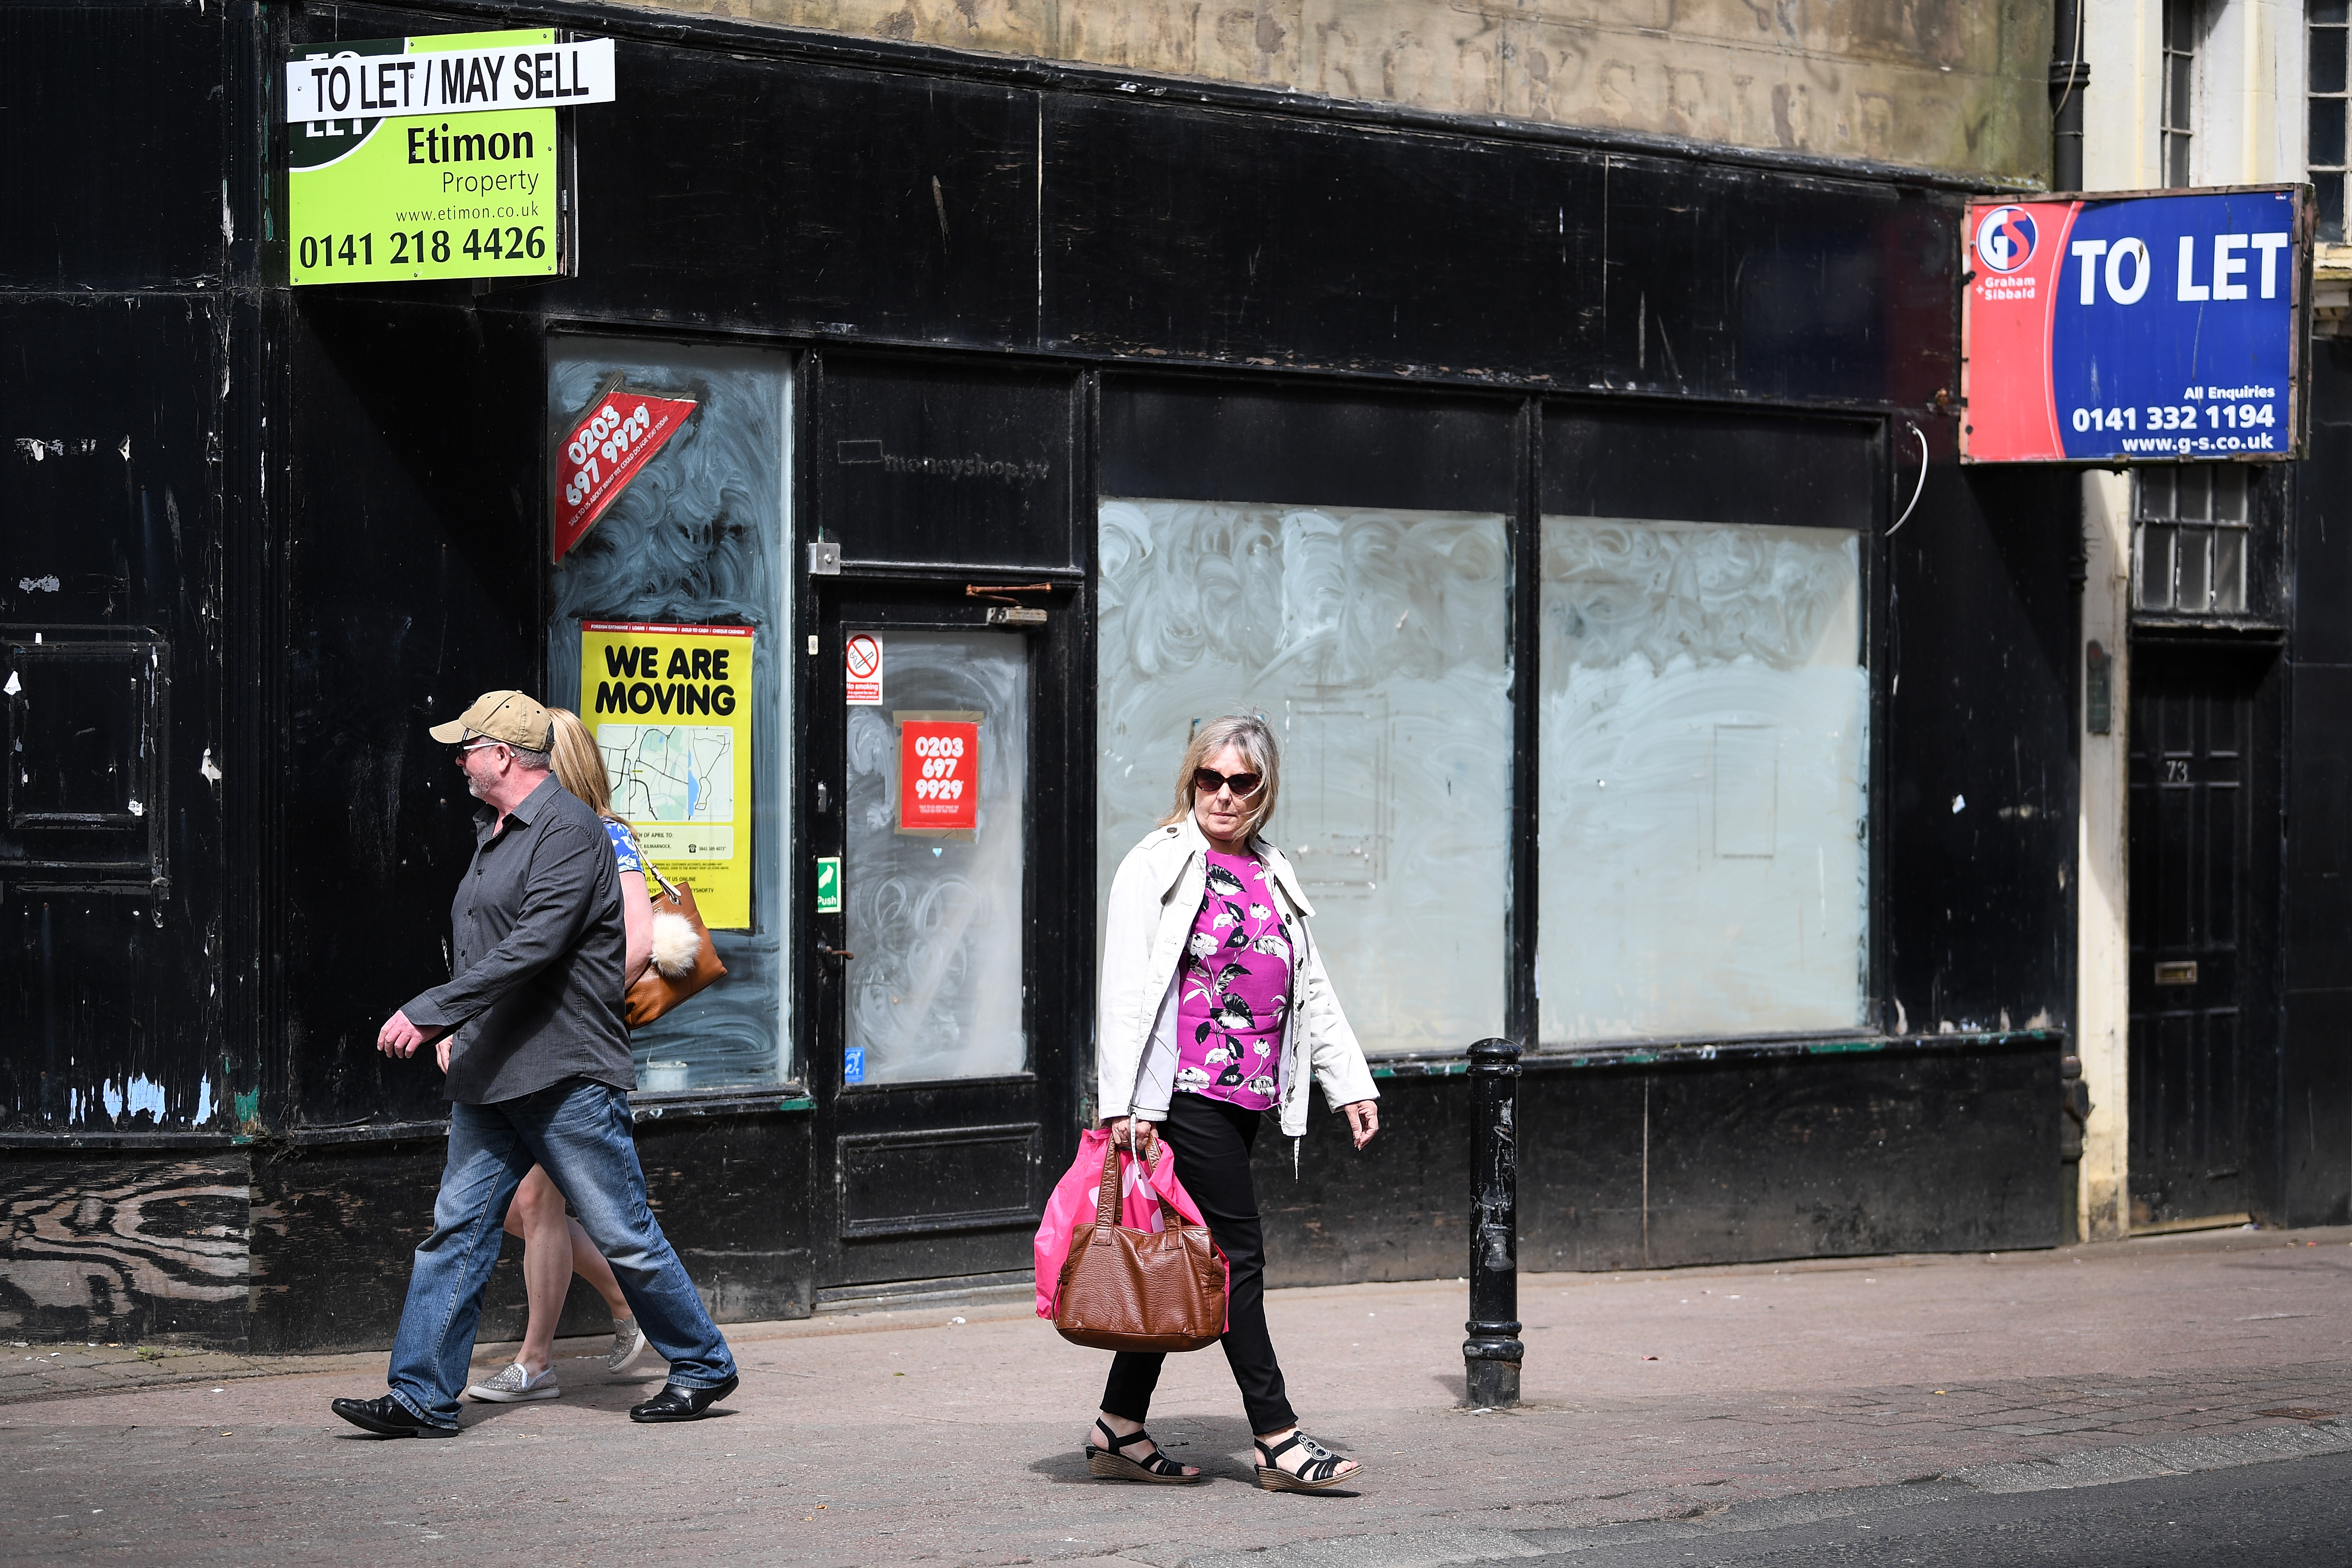 AYR, SCOTLAND - JUNE 05:  Members of the public walk past closed down shops on June 5, 2018 in Ayr, Scotland. Recent research shows that highstreets in Scotland have suffered the largest reduction in the number of occupied shops anywhere in the UK.  (Photo by Jeff J Mitchell/Getty Images)